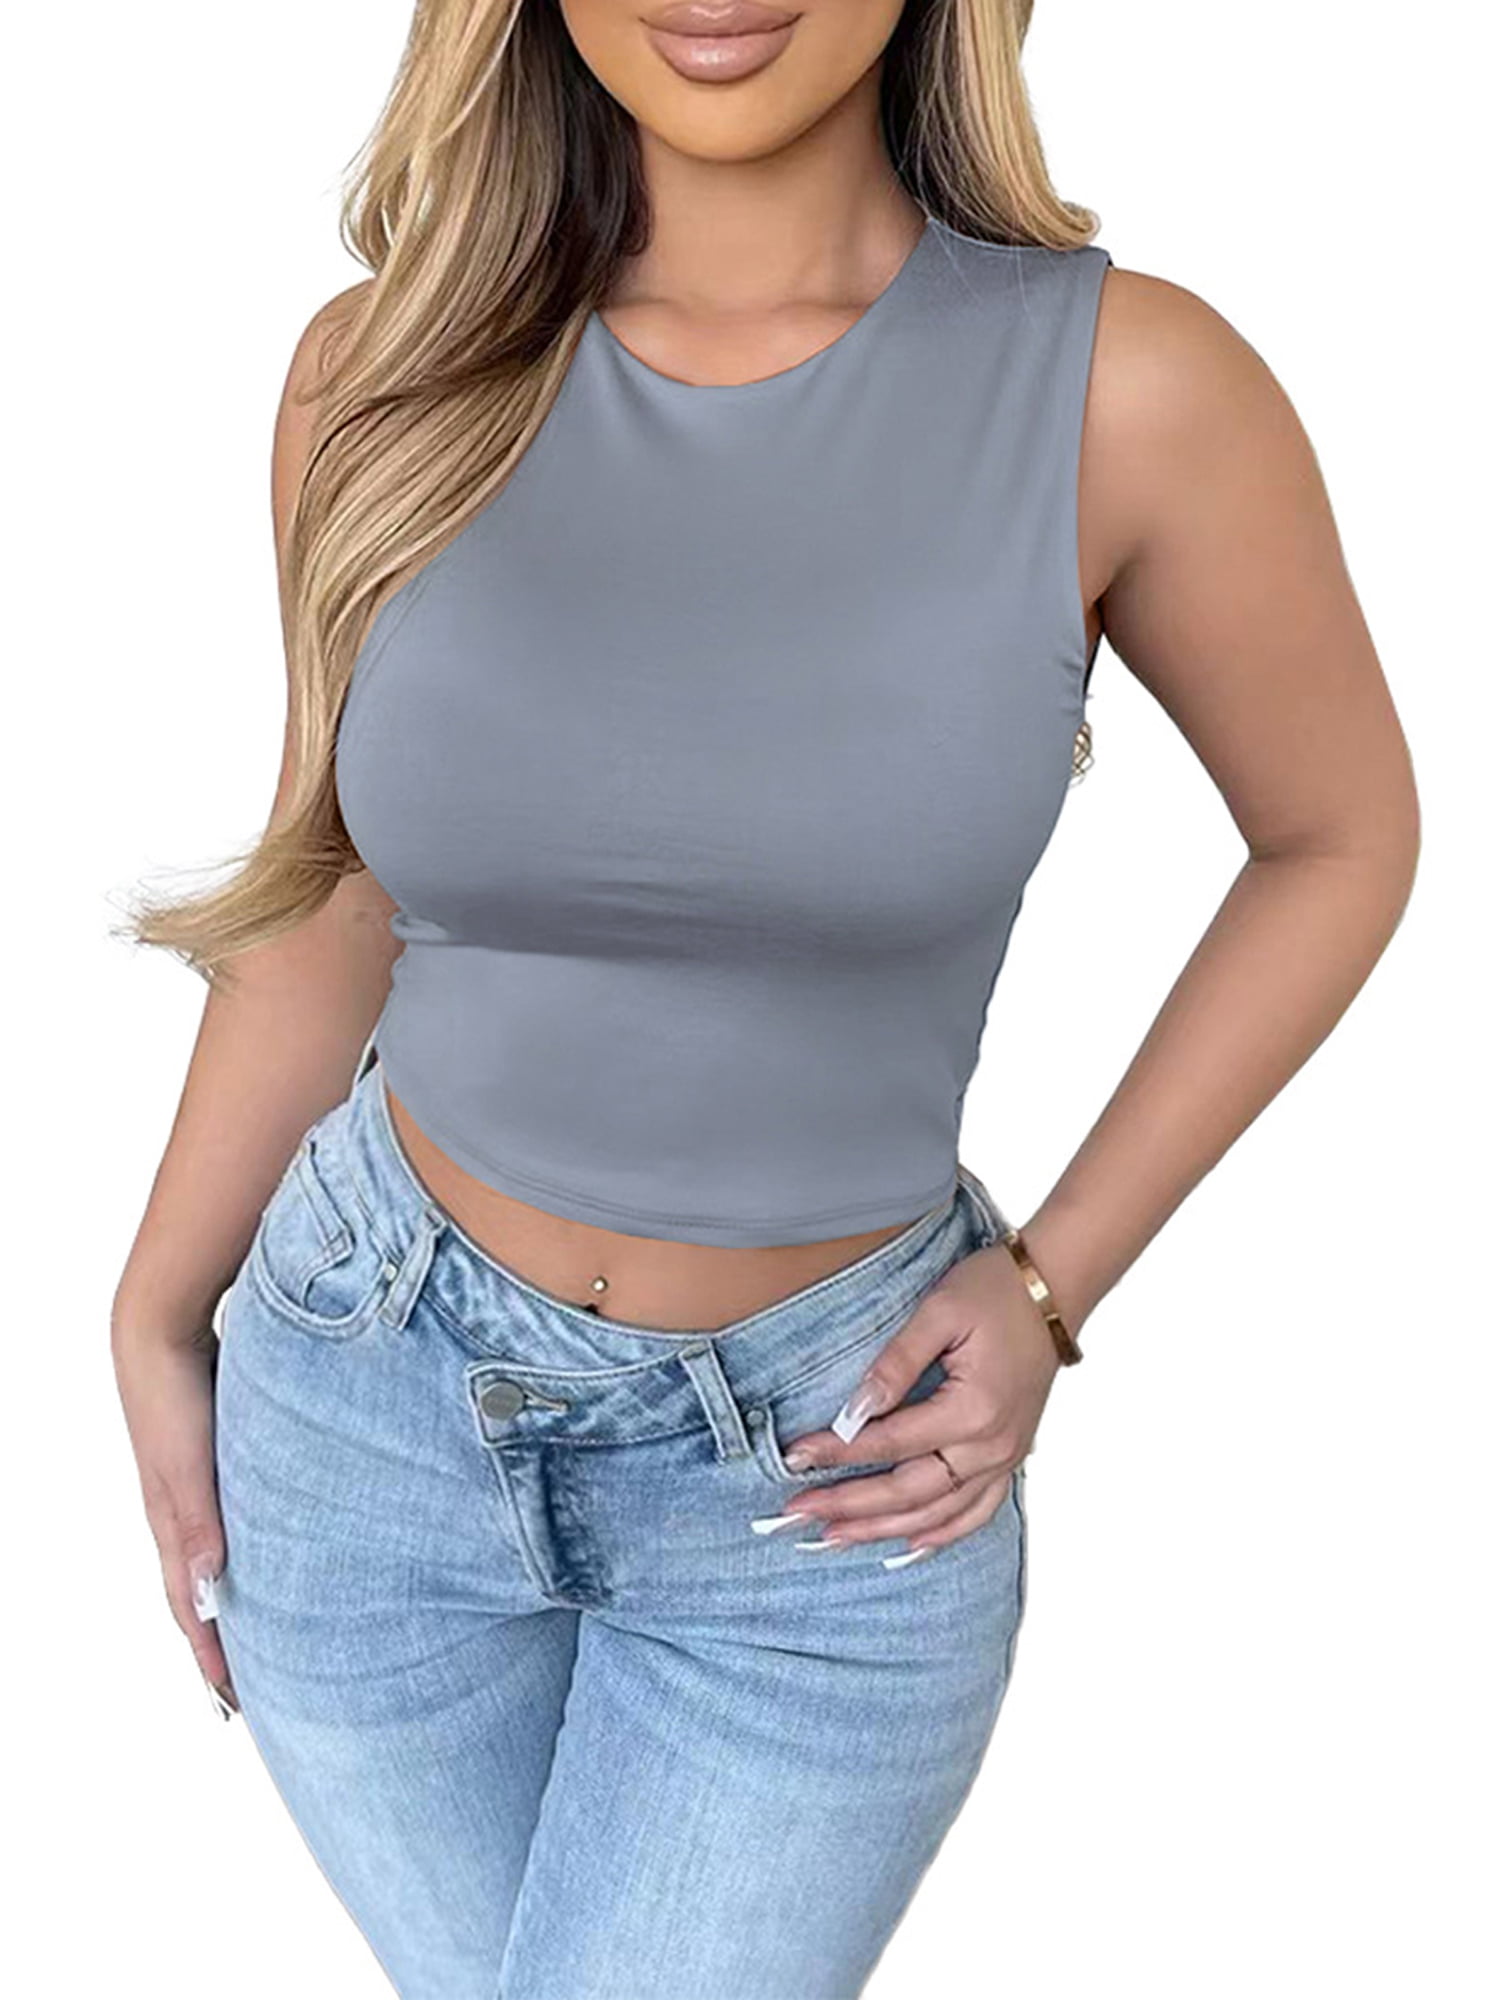 Women Summer Sleeveless Tops Workout Tank Tops For Women T Back Tank Tops  For Women Tank Tops For Women Casual Summer 15 And Under Items Prime Items  Under 1 Dollar Wearhouse.Deals Clearance